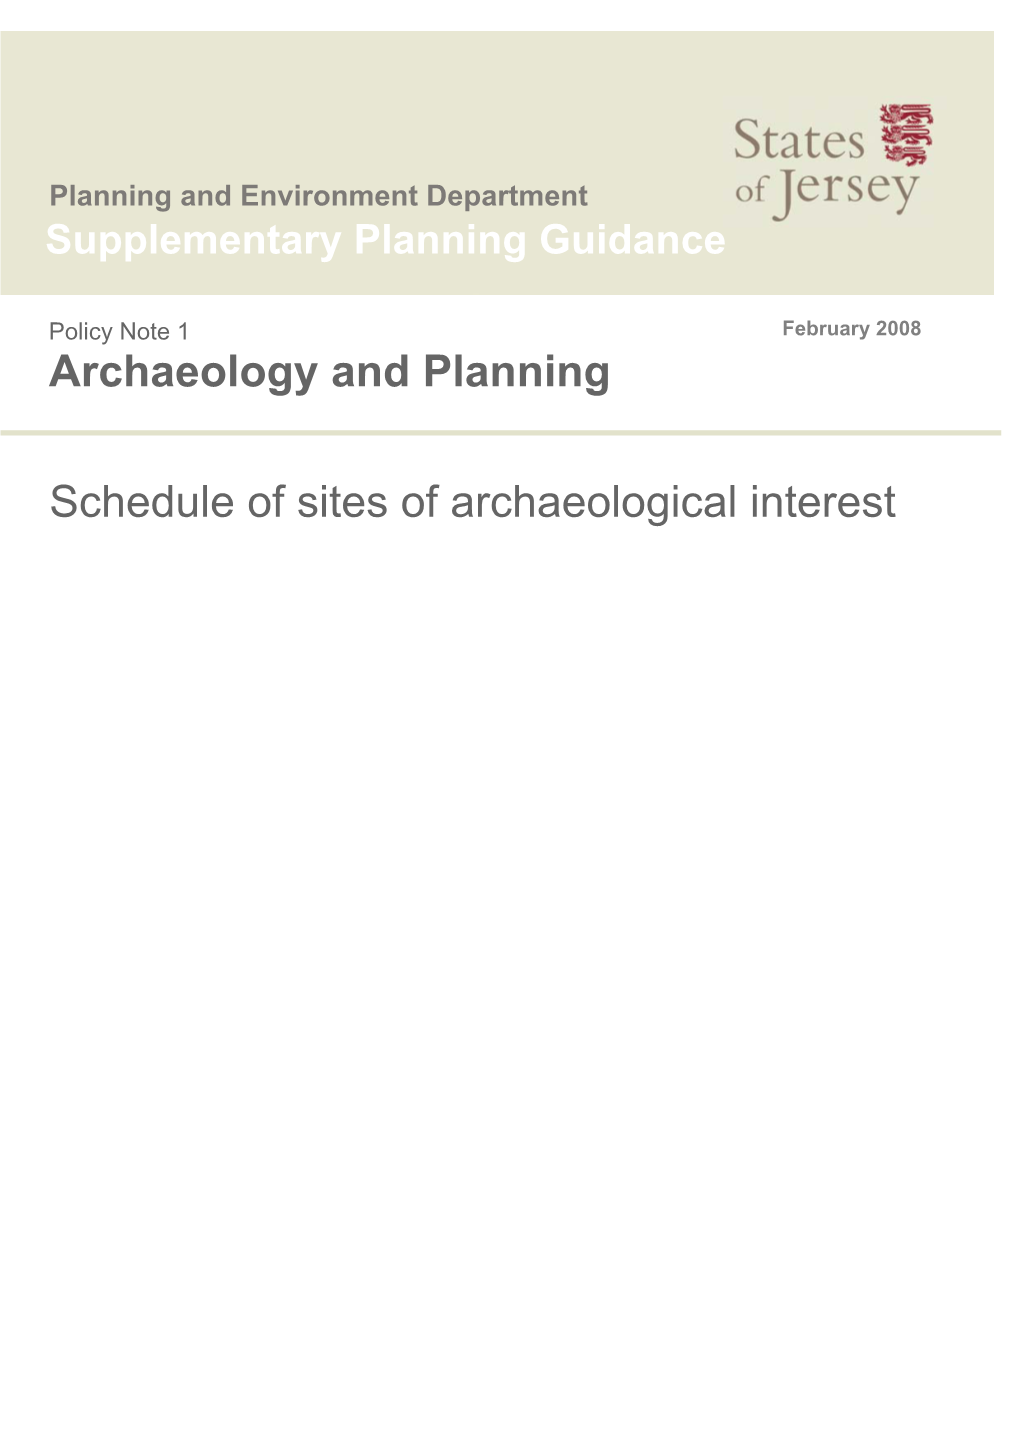 Archaeology and Planning Schedule of Sites of Archaeological Interest